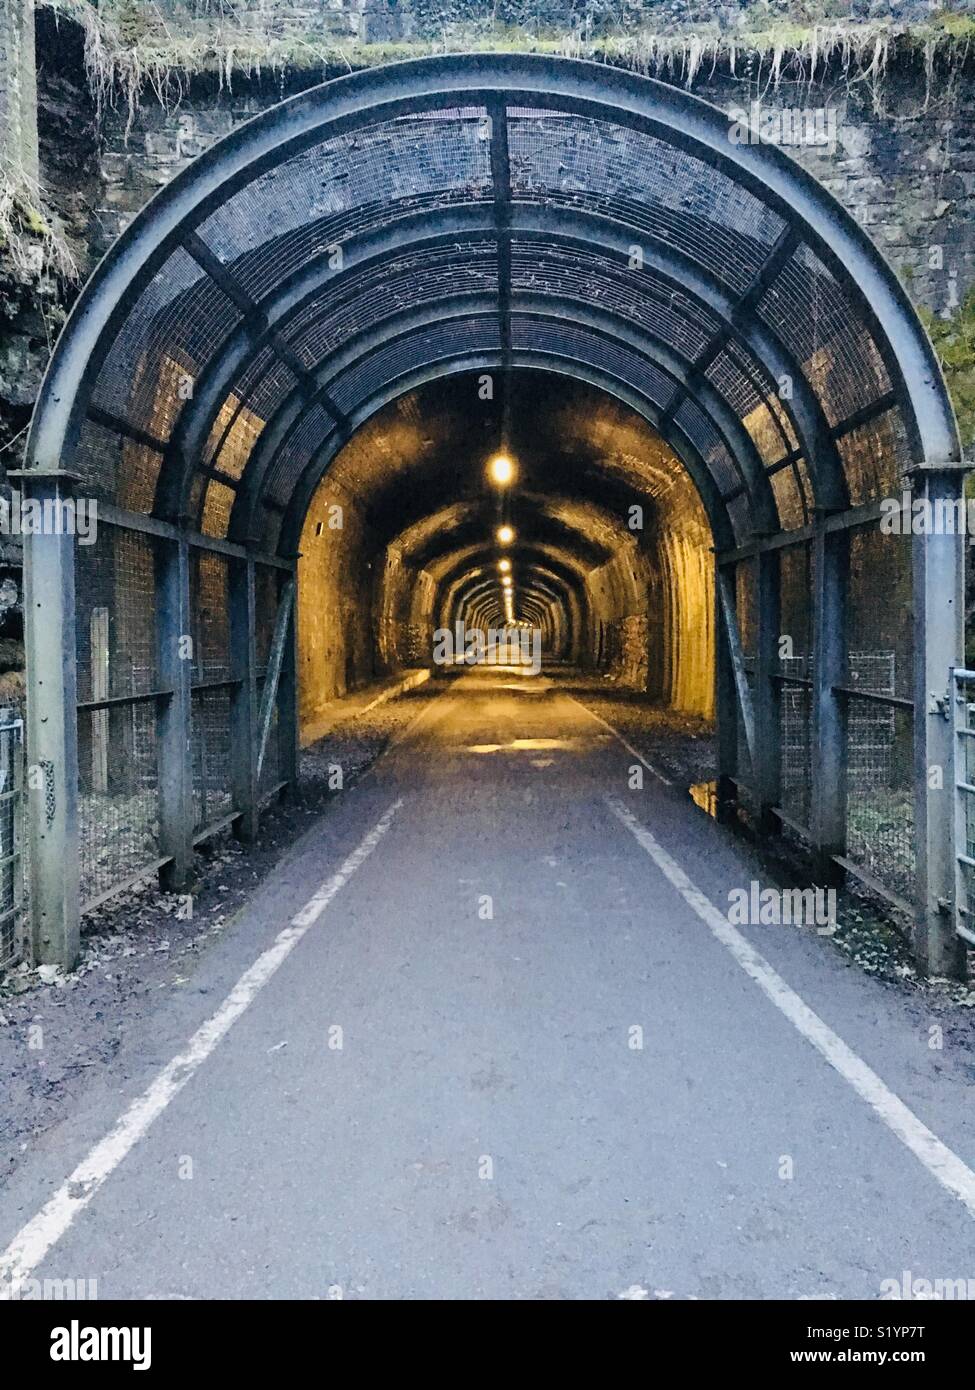 Entrance to a tunnel Stock Photo